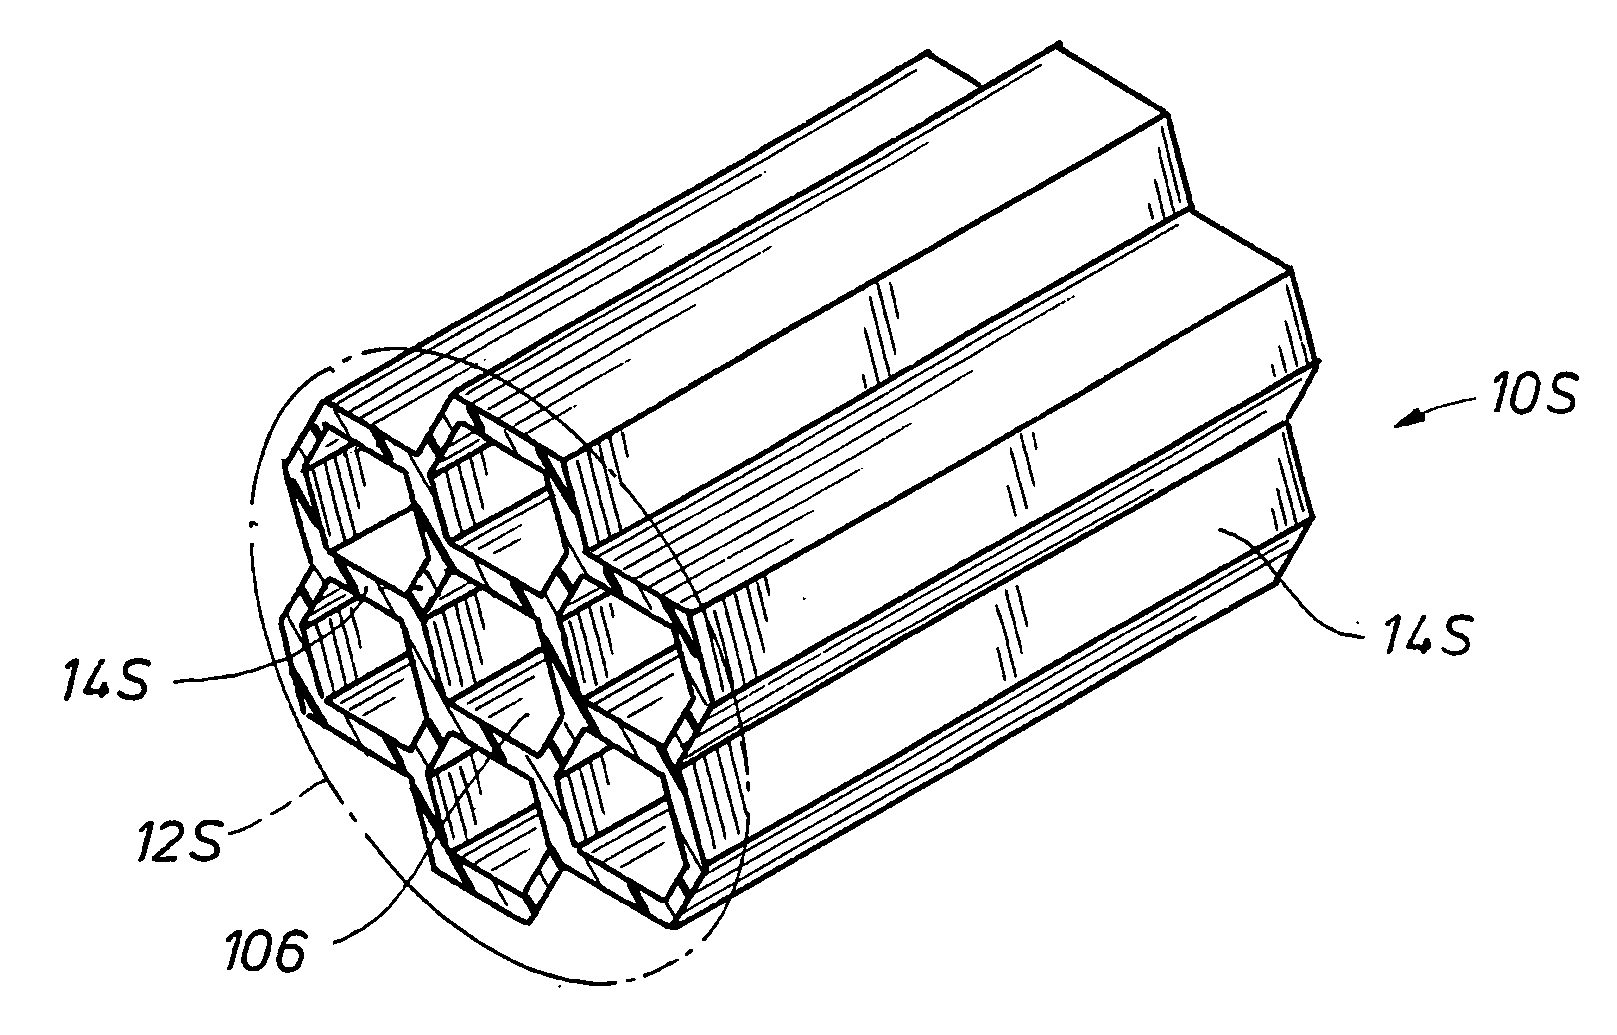 Multiple material piping component